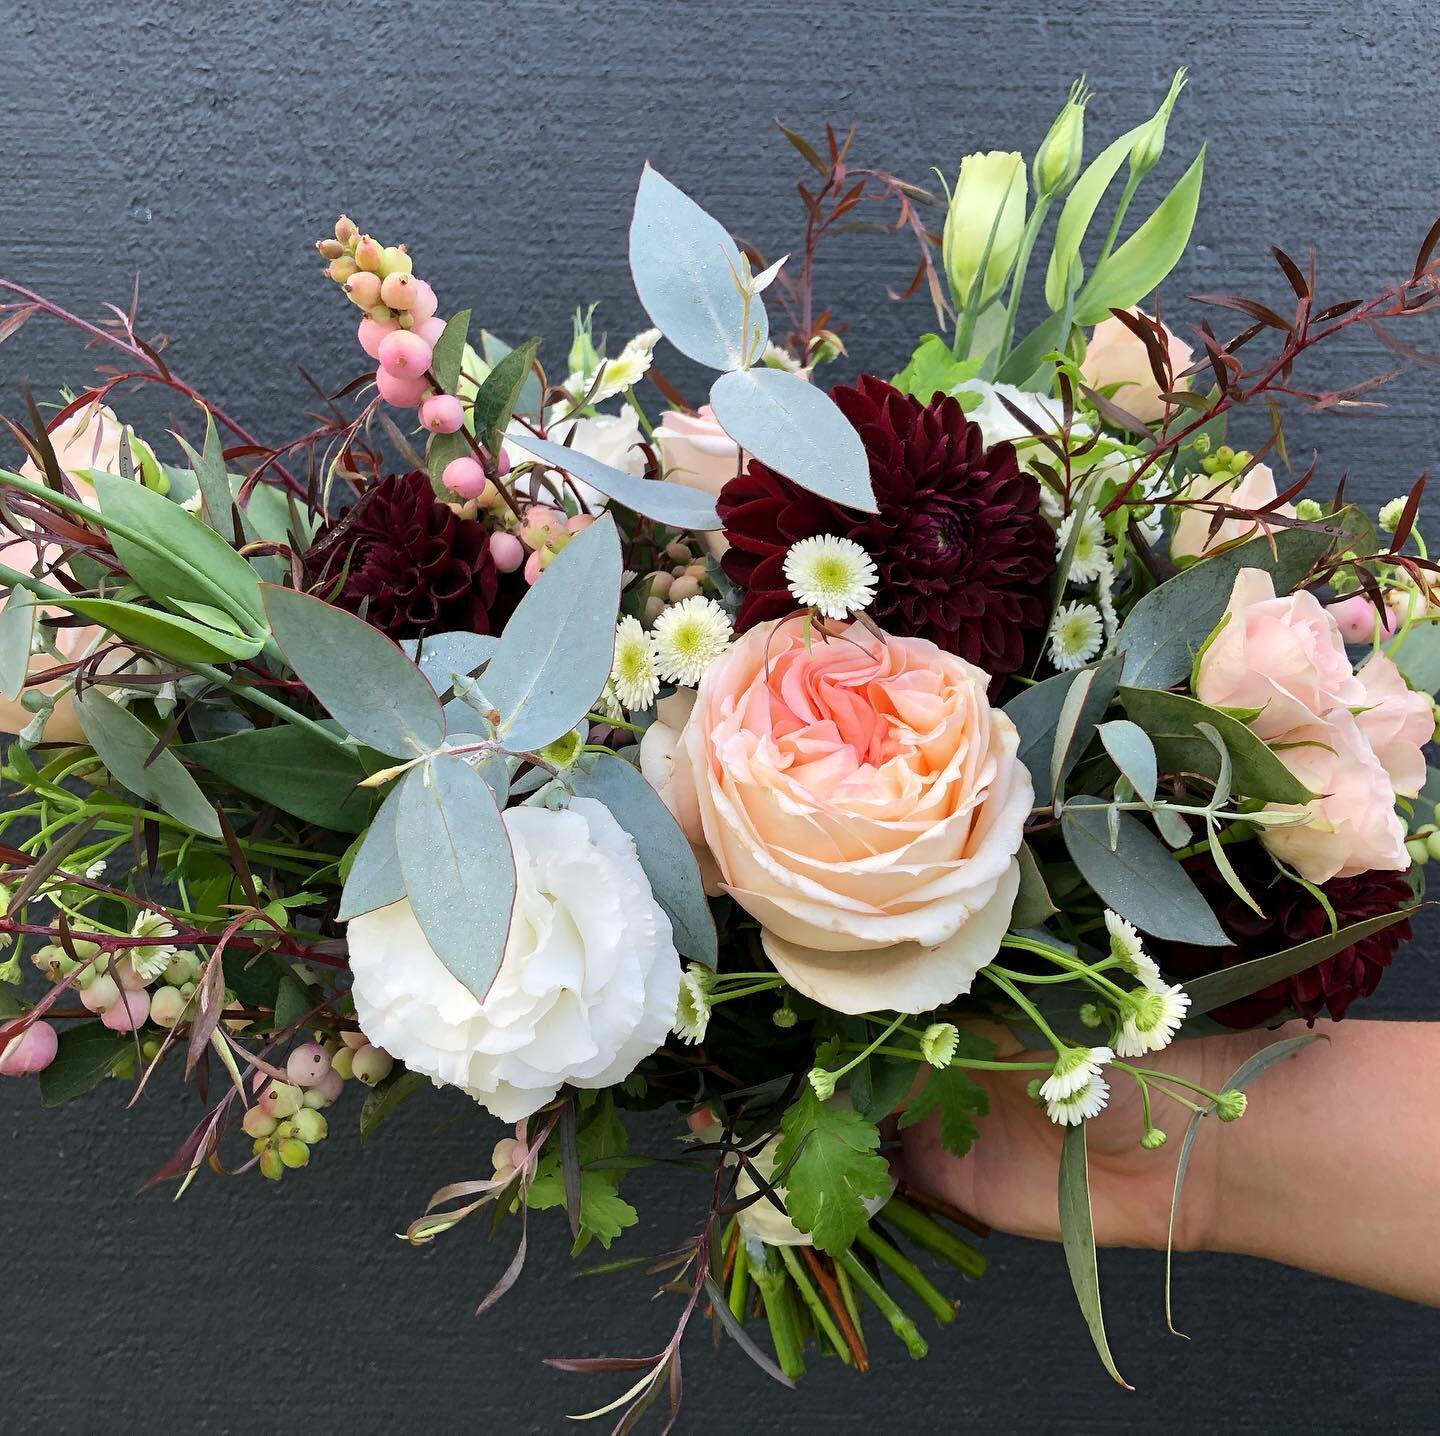 One of last weeks weddings, unfortunately had to be downsized due to covid restrictions but went ahead with this beautifully scented brides bouquet in blush, burgundy and white 💕. #scentedflowersarethebest #aucklandweddings #burgundyandblushwedding 